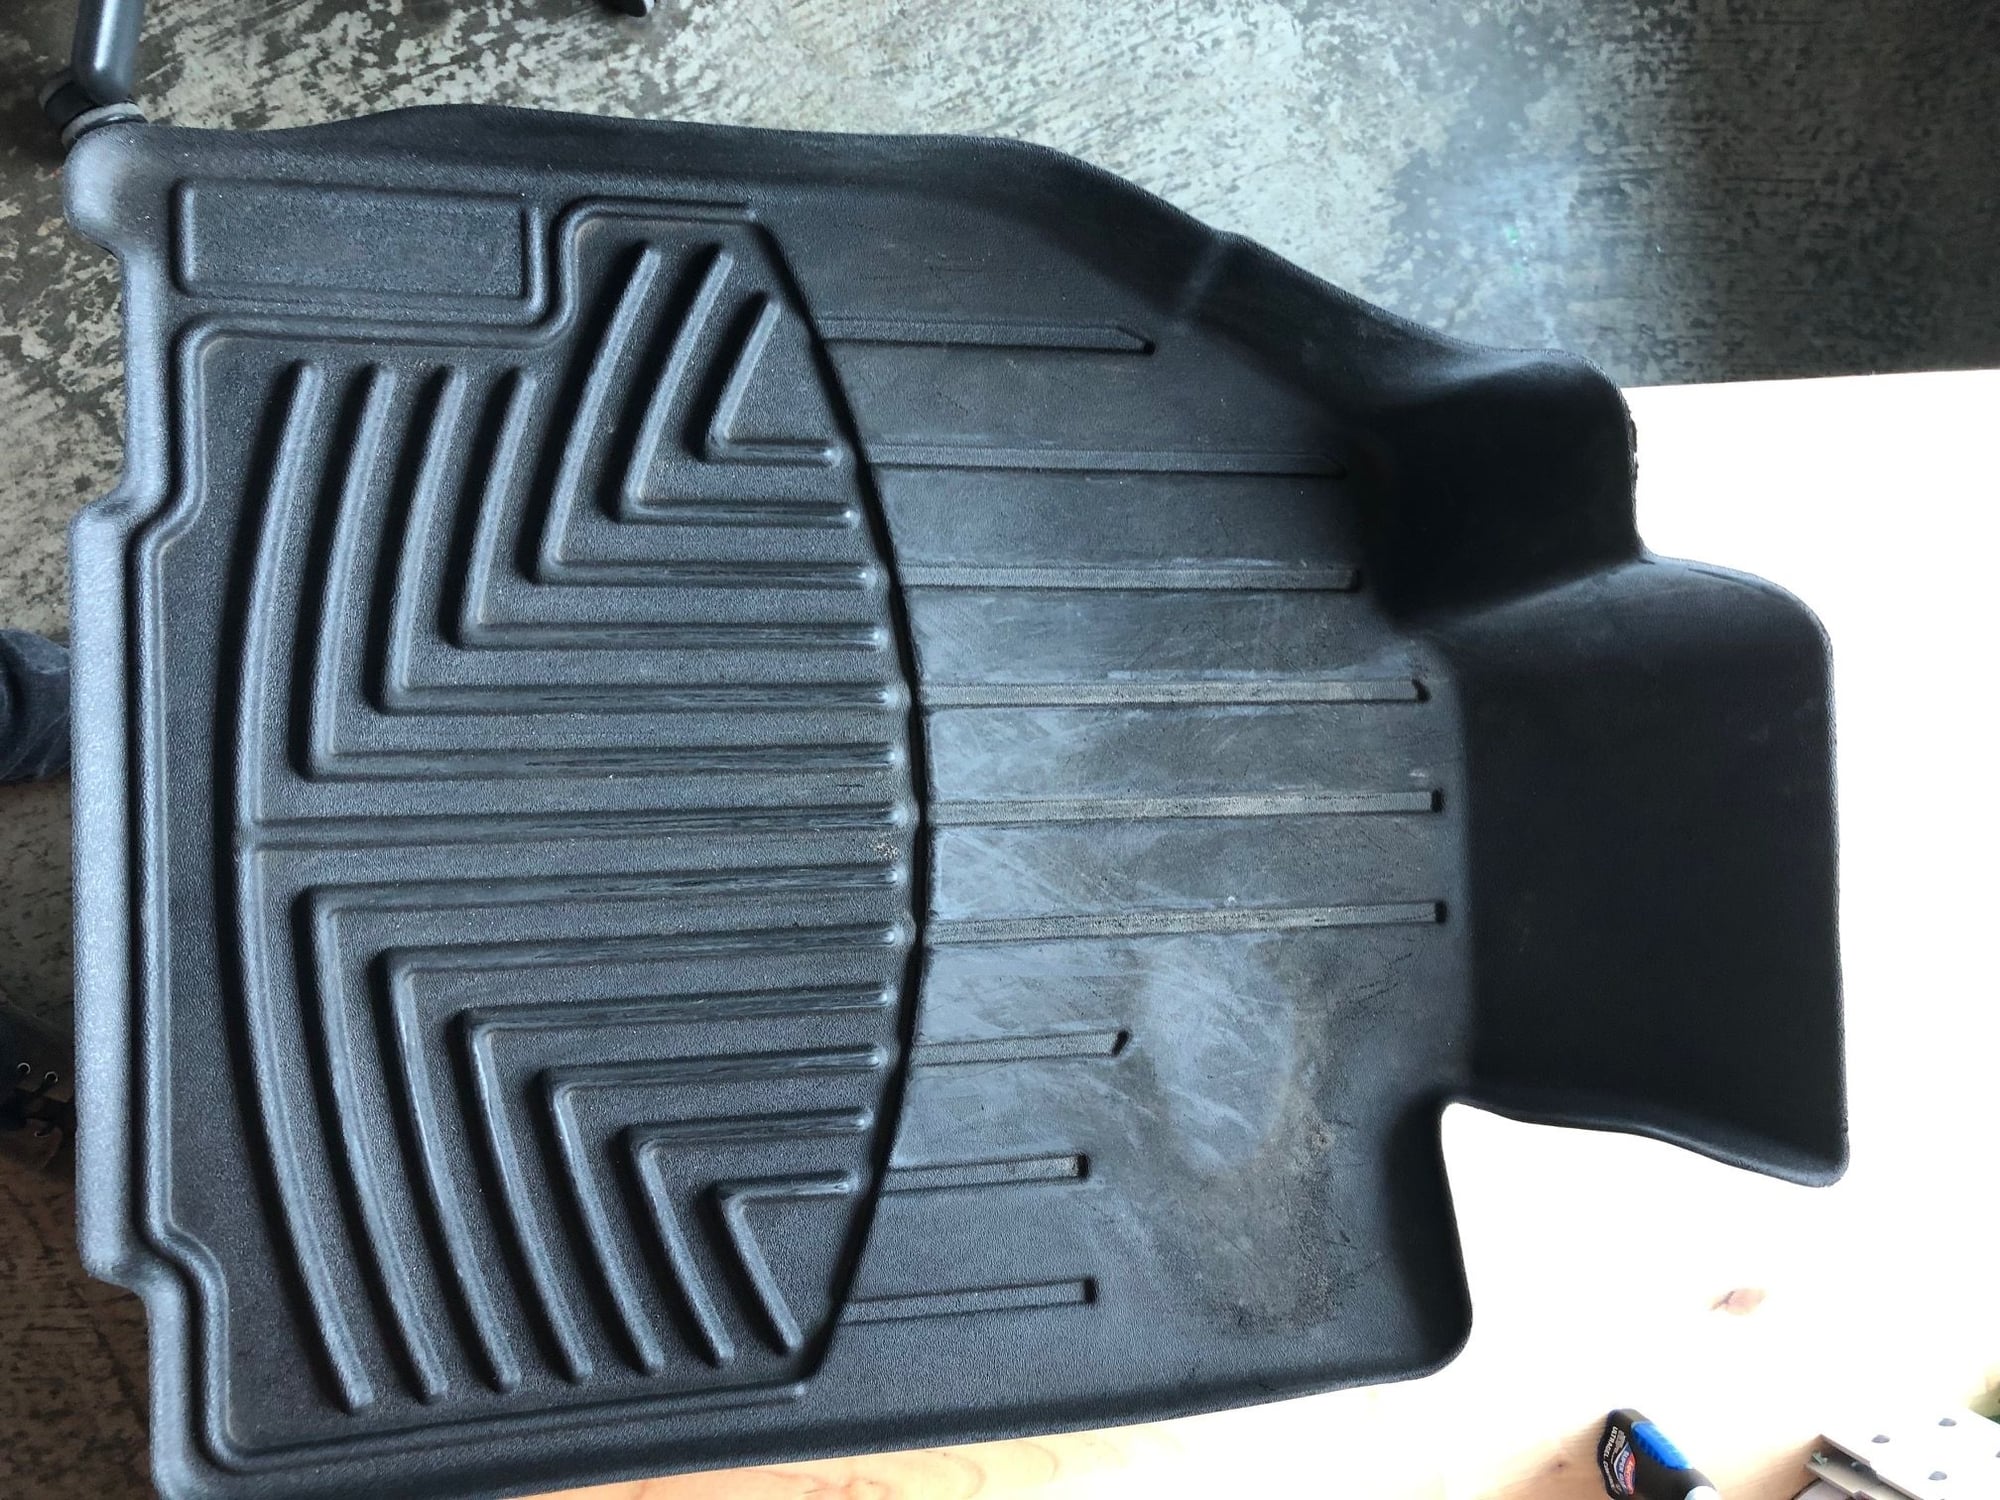 Interior/Upholstery - 997 rear seats and mats - Used - 2006 to 2014 Porsche 911 - Jersey City, NJ 07306, United States